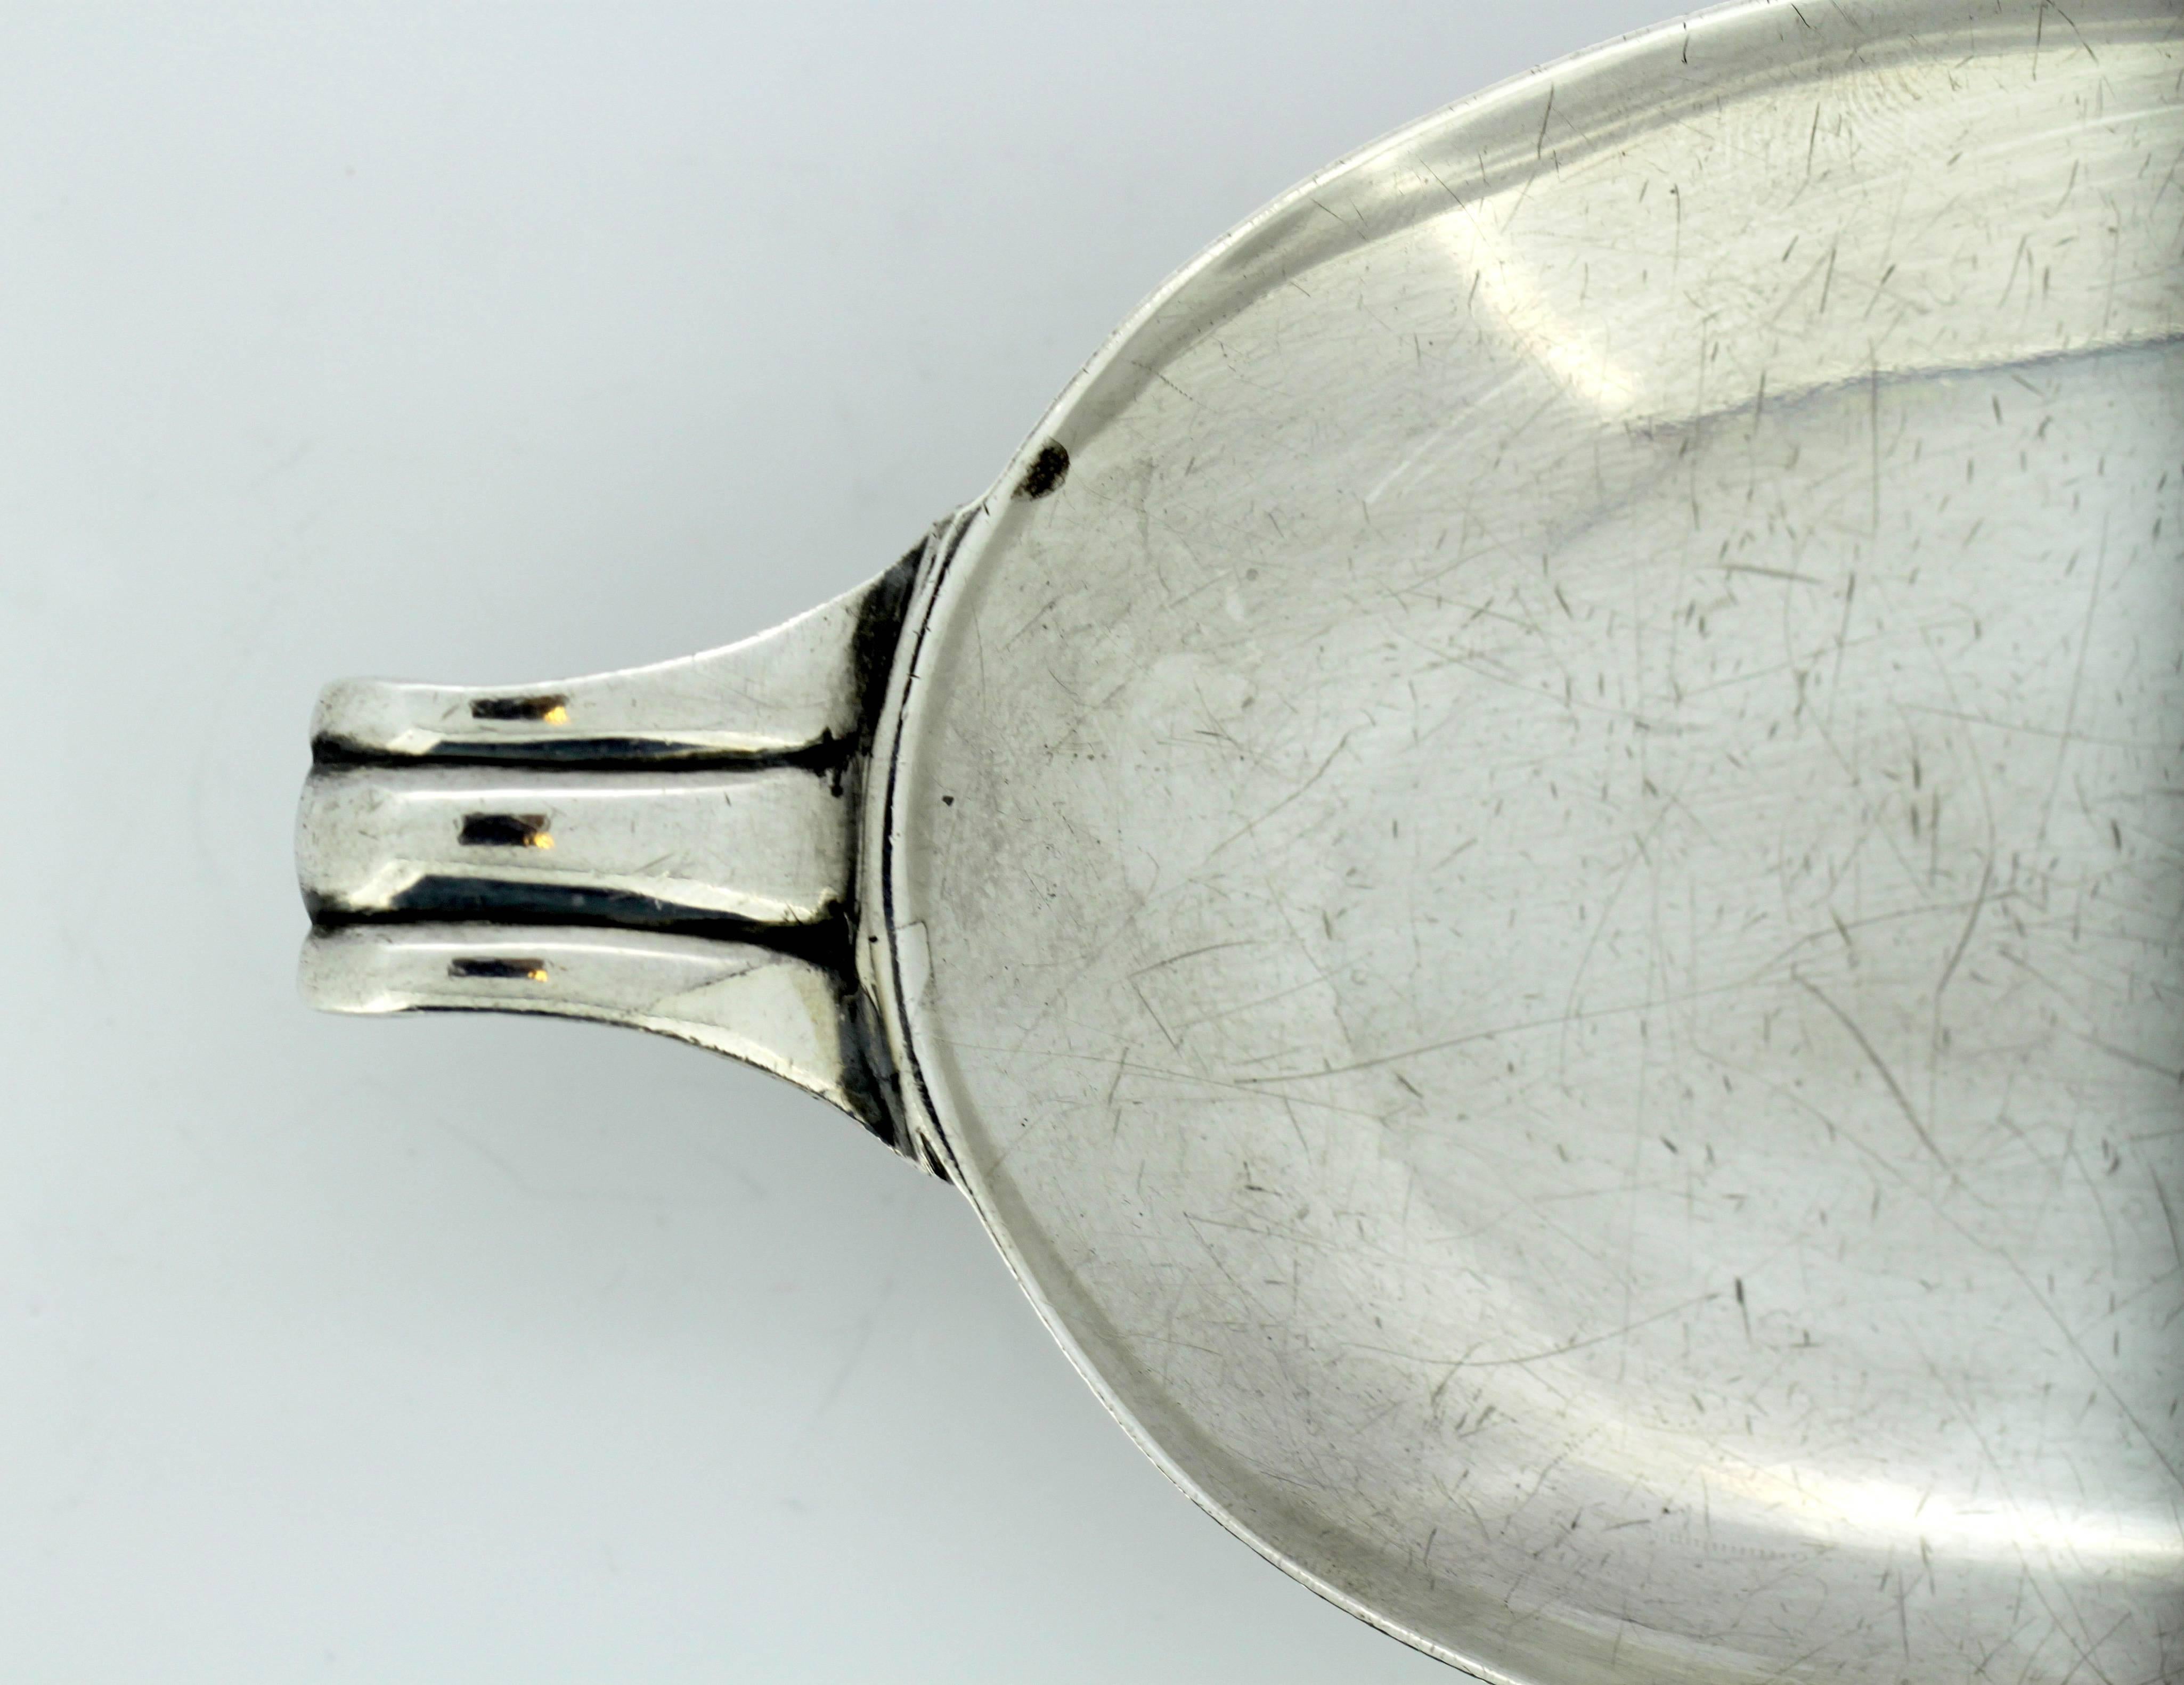 Sterling silver dish
Maker: William Walter
Made in London, 1943.
Fully hallmarked.

Dimensions: 
Size: 18.1 x 8.7 x 2.3 cm
Weight: 118 grams

Condition: Has surface scratches throughout the whole dish, no damage, great overall condition,